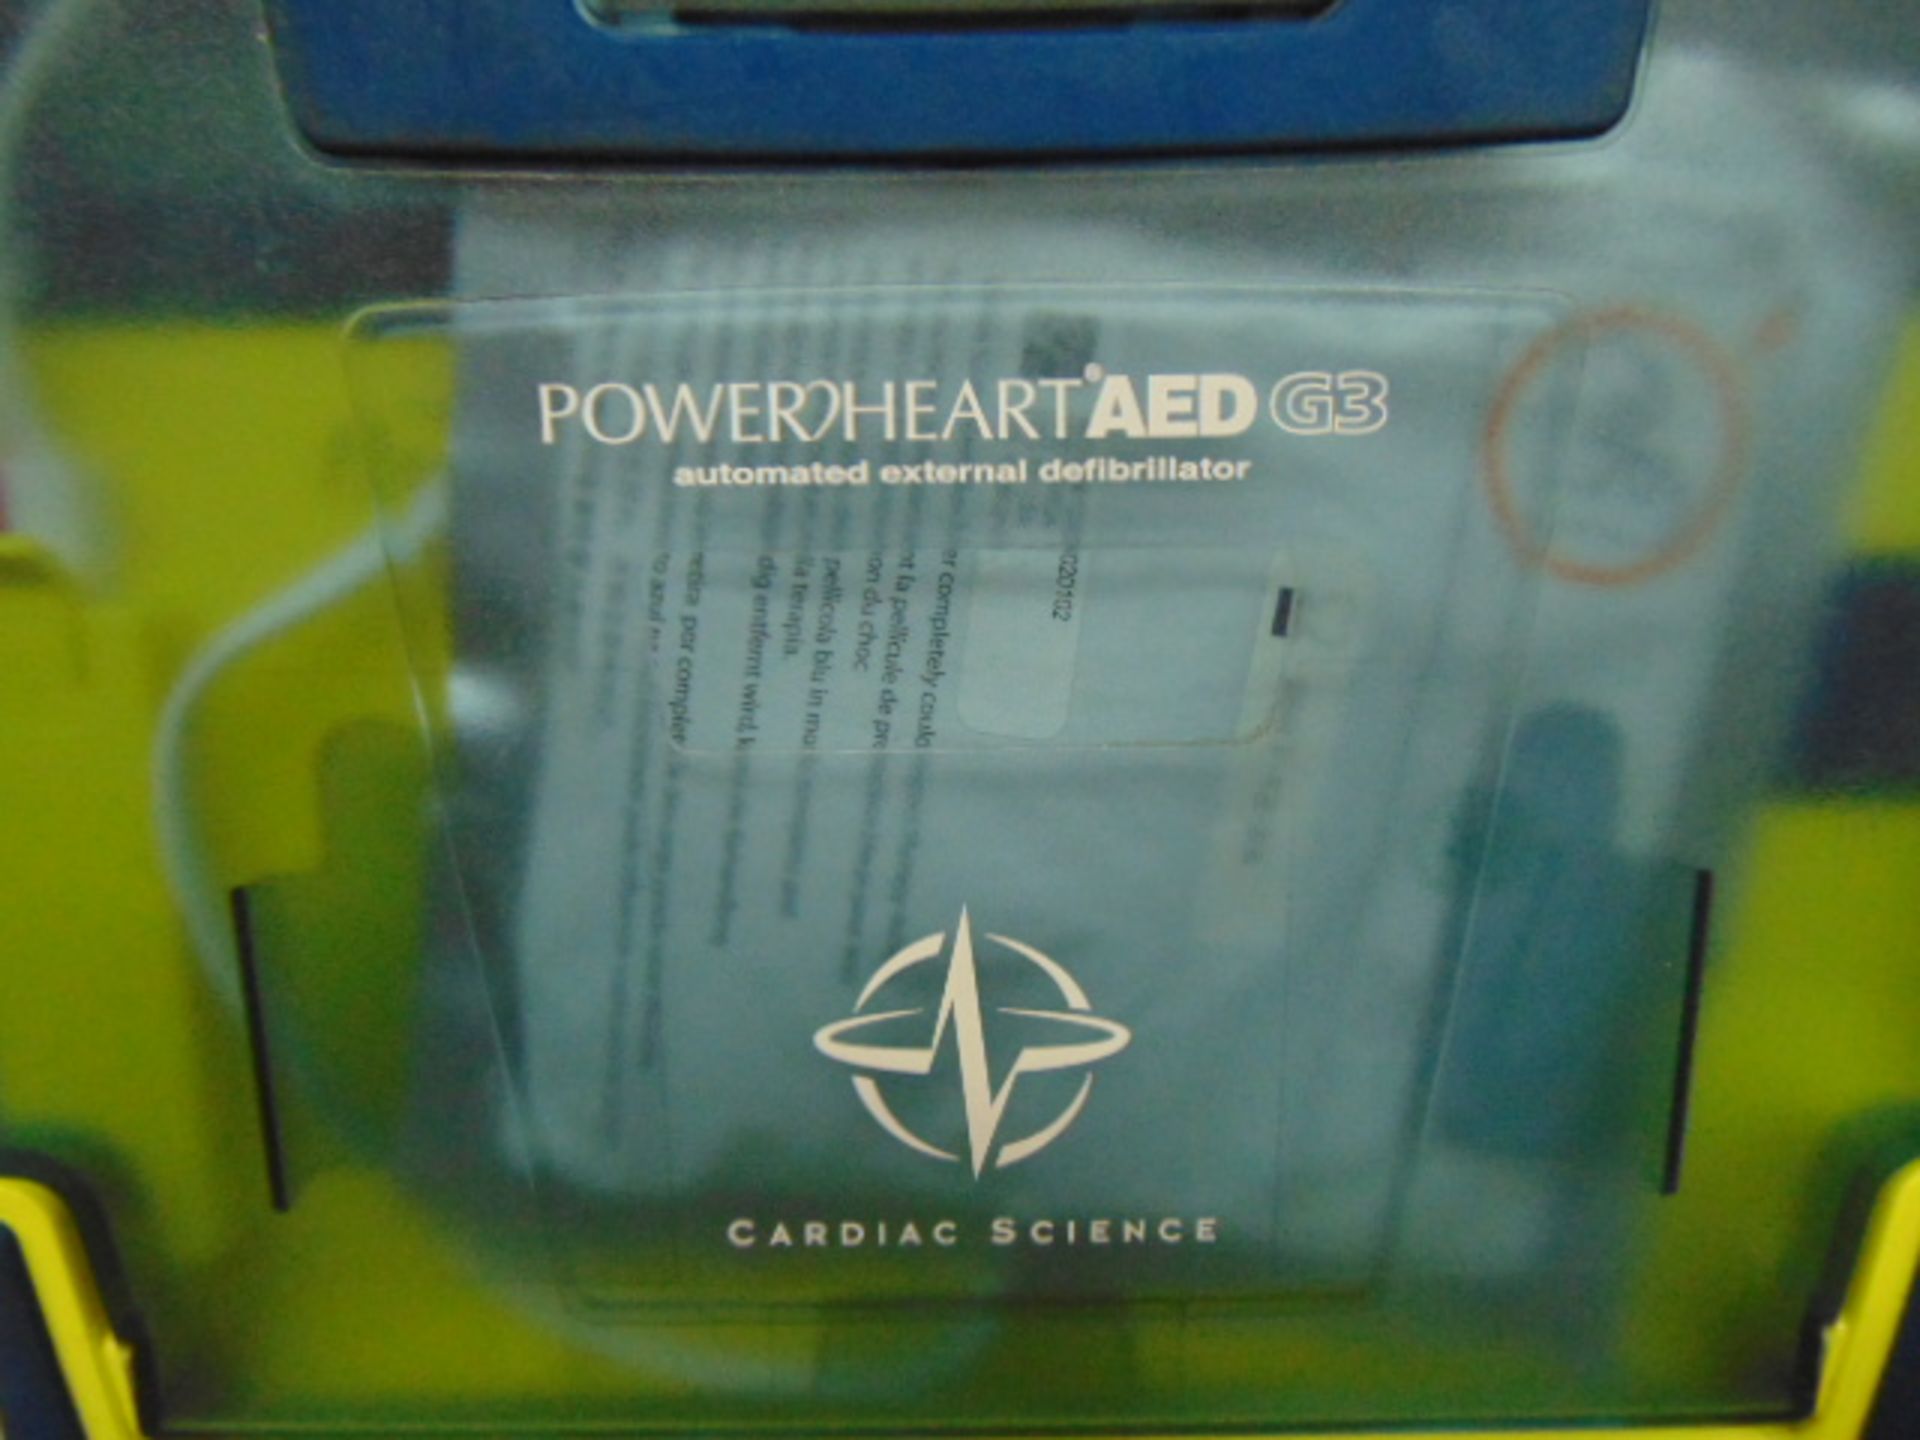 2 x Cardiac Science Powerheart G3 Automatic AED Automatic External Defribrillators - Image 11 of 12